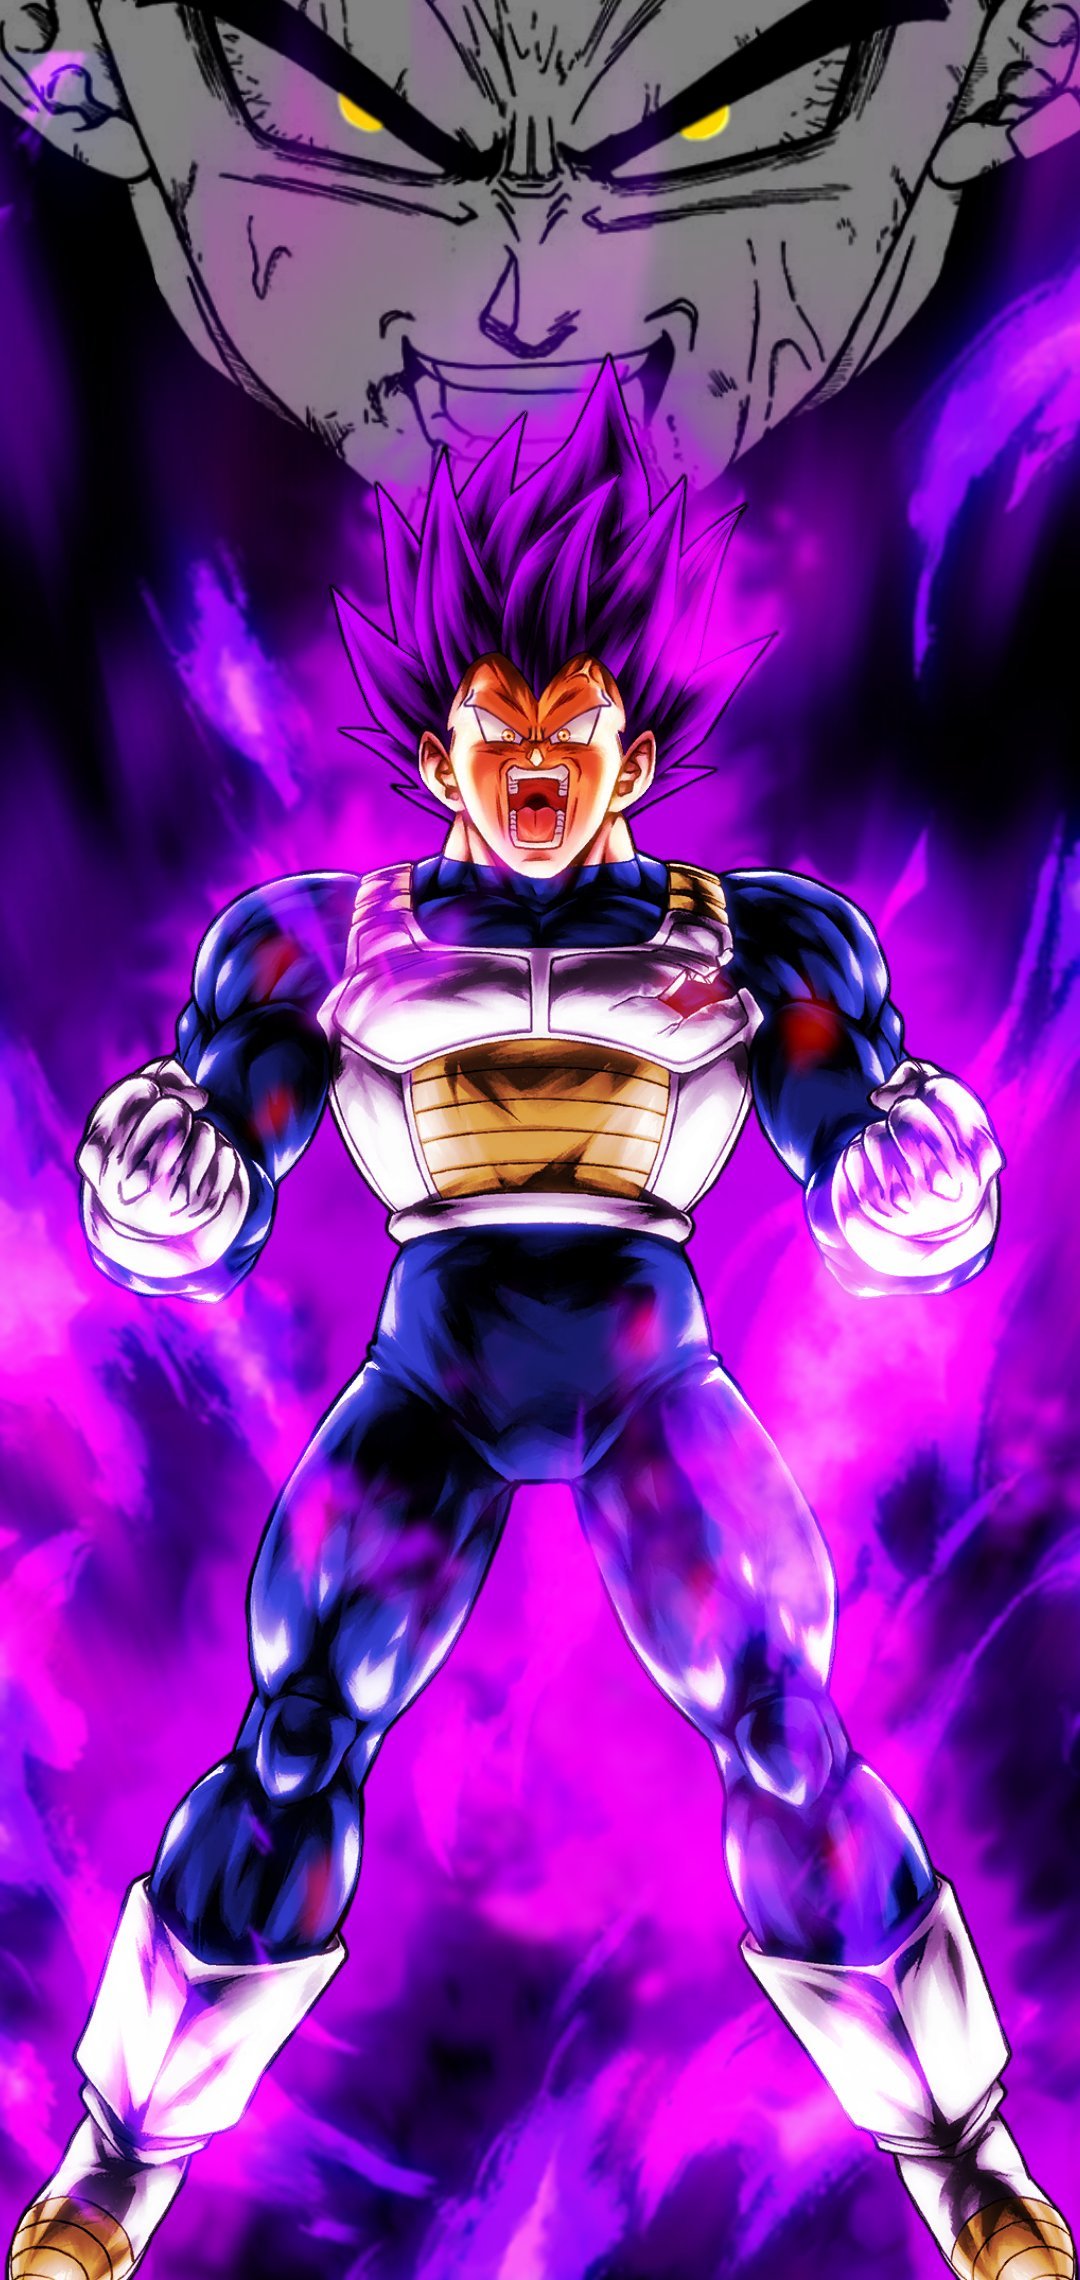 DBZ Vegeta Blue Wallpapers - Free Anime Wallpapers for iPhone